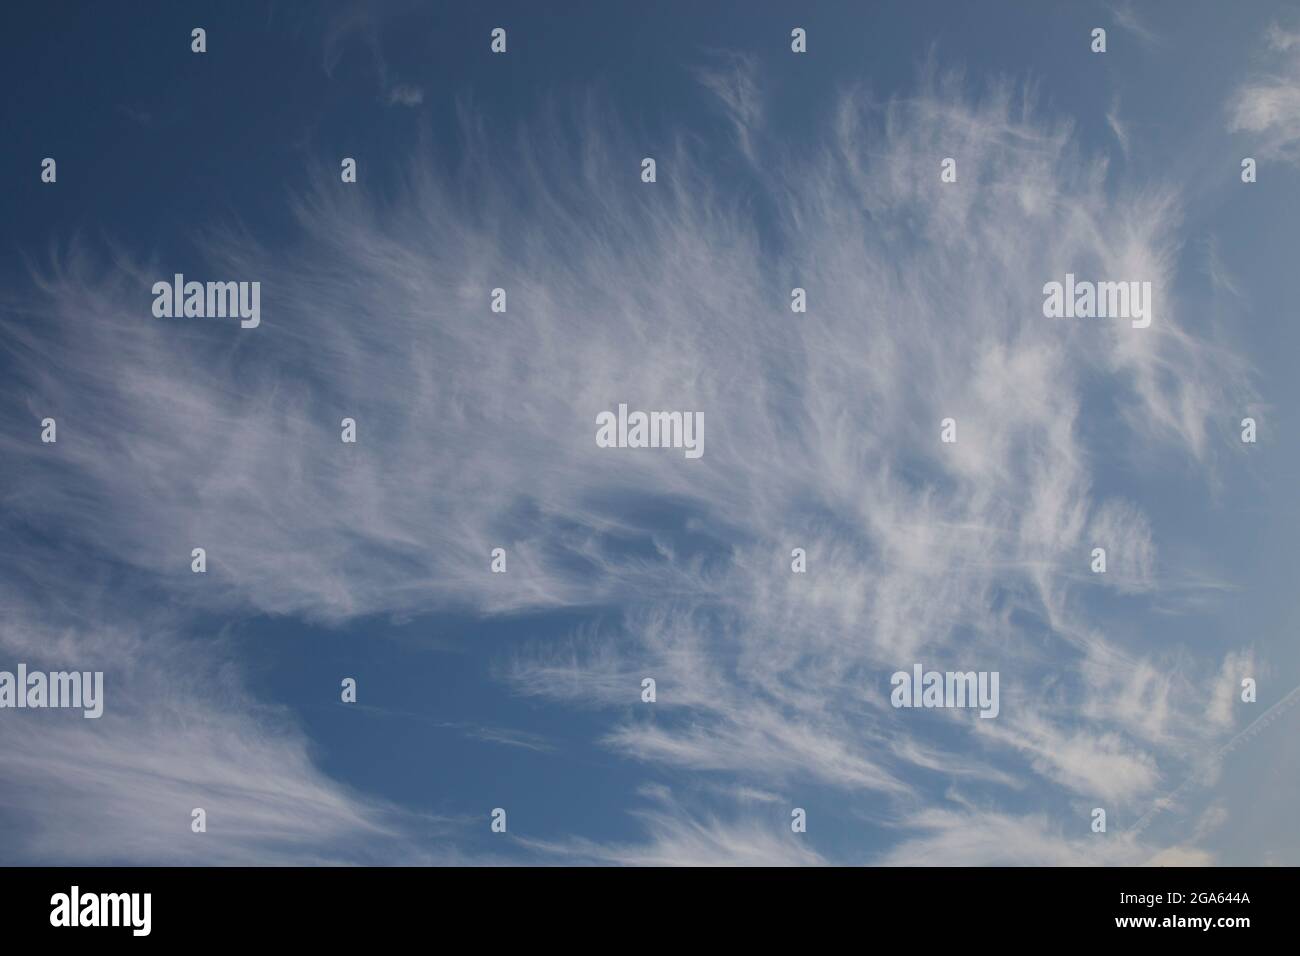 Wispy cirrus clouds high up in the sky on an autumnal evening Stock Photo